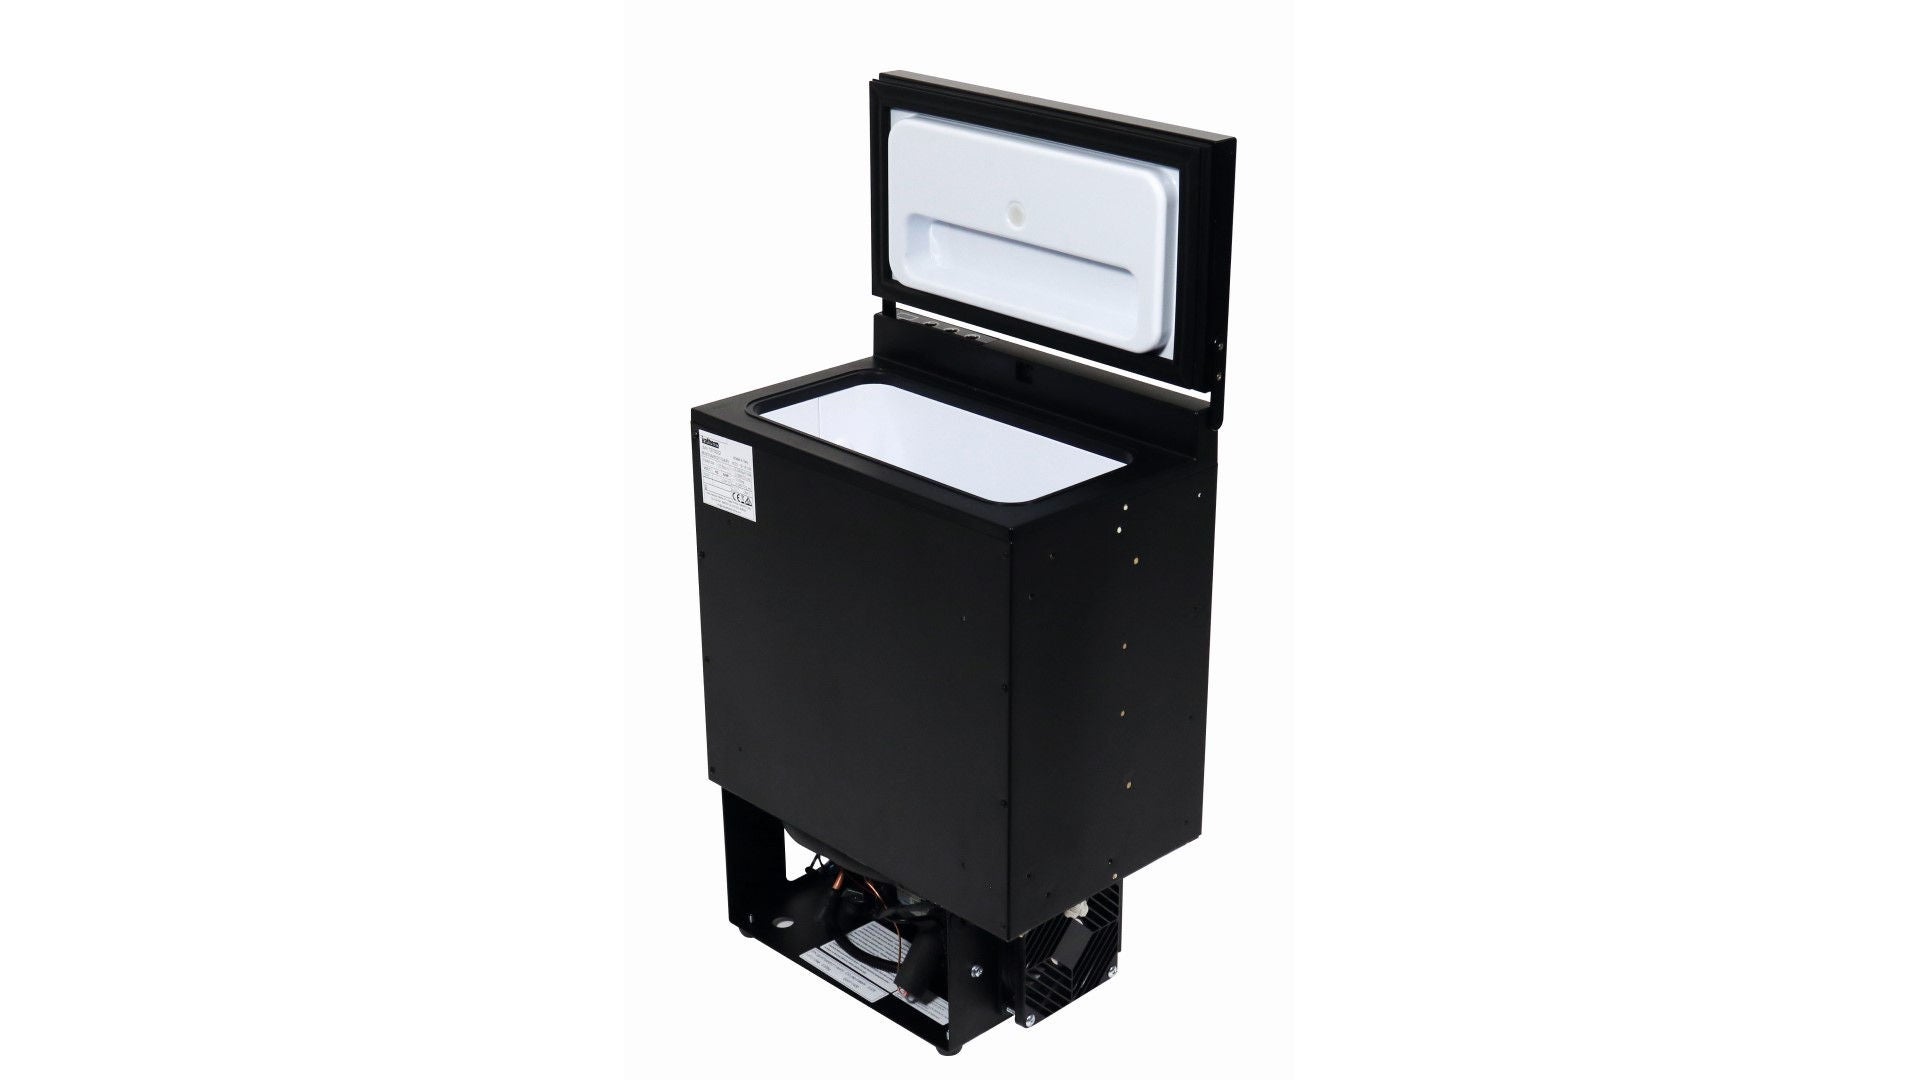 Product picture of BI 16 cooling box with open lid